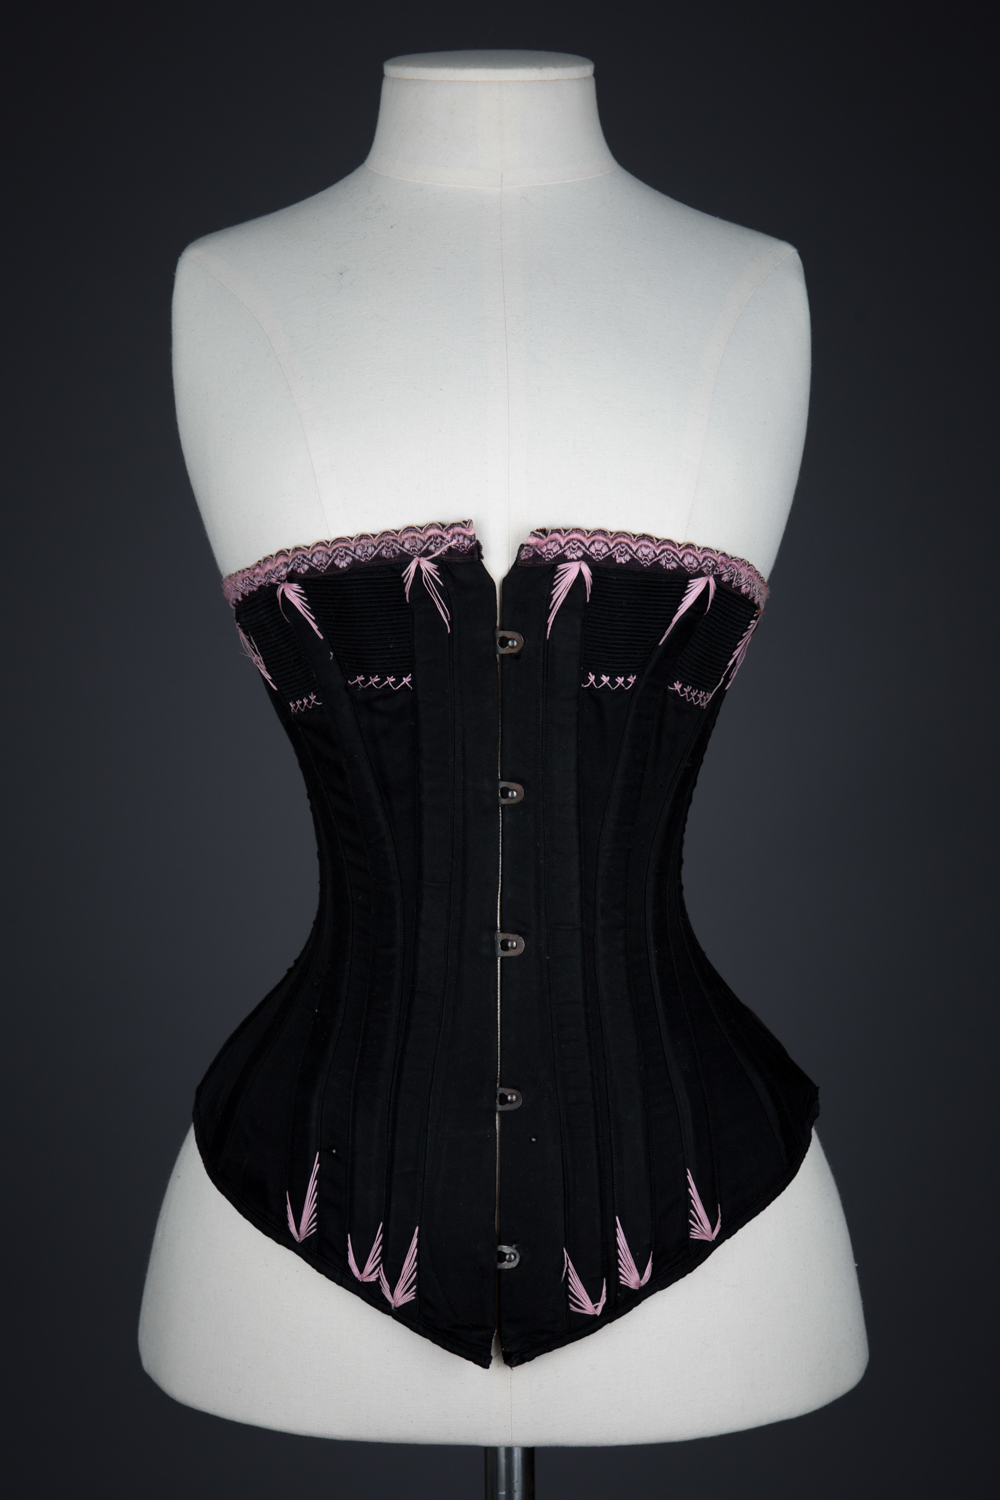 Black Cotton Corset With Spoon Busk, Pink Flossing Embroidery & Woven Trim, c. 1890-1900s, Great Britain. The Underpinnings Museum. Photography by Tigz Rice.